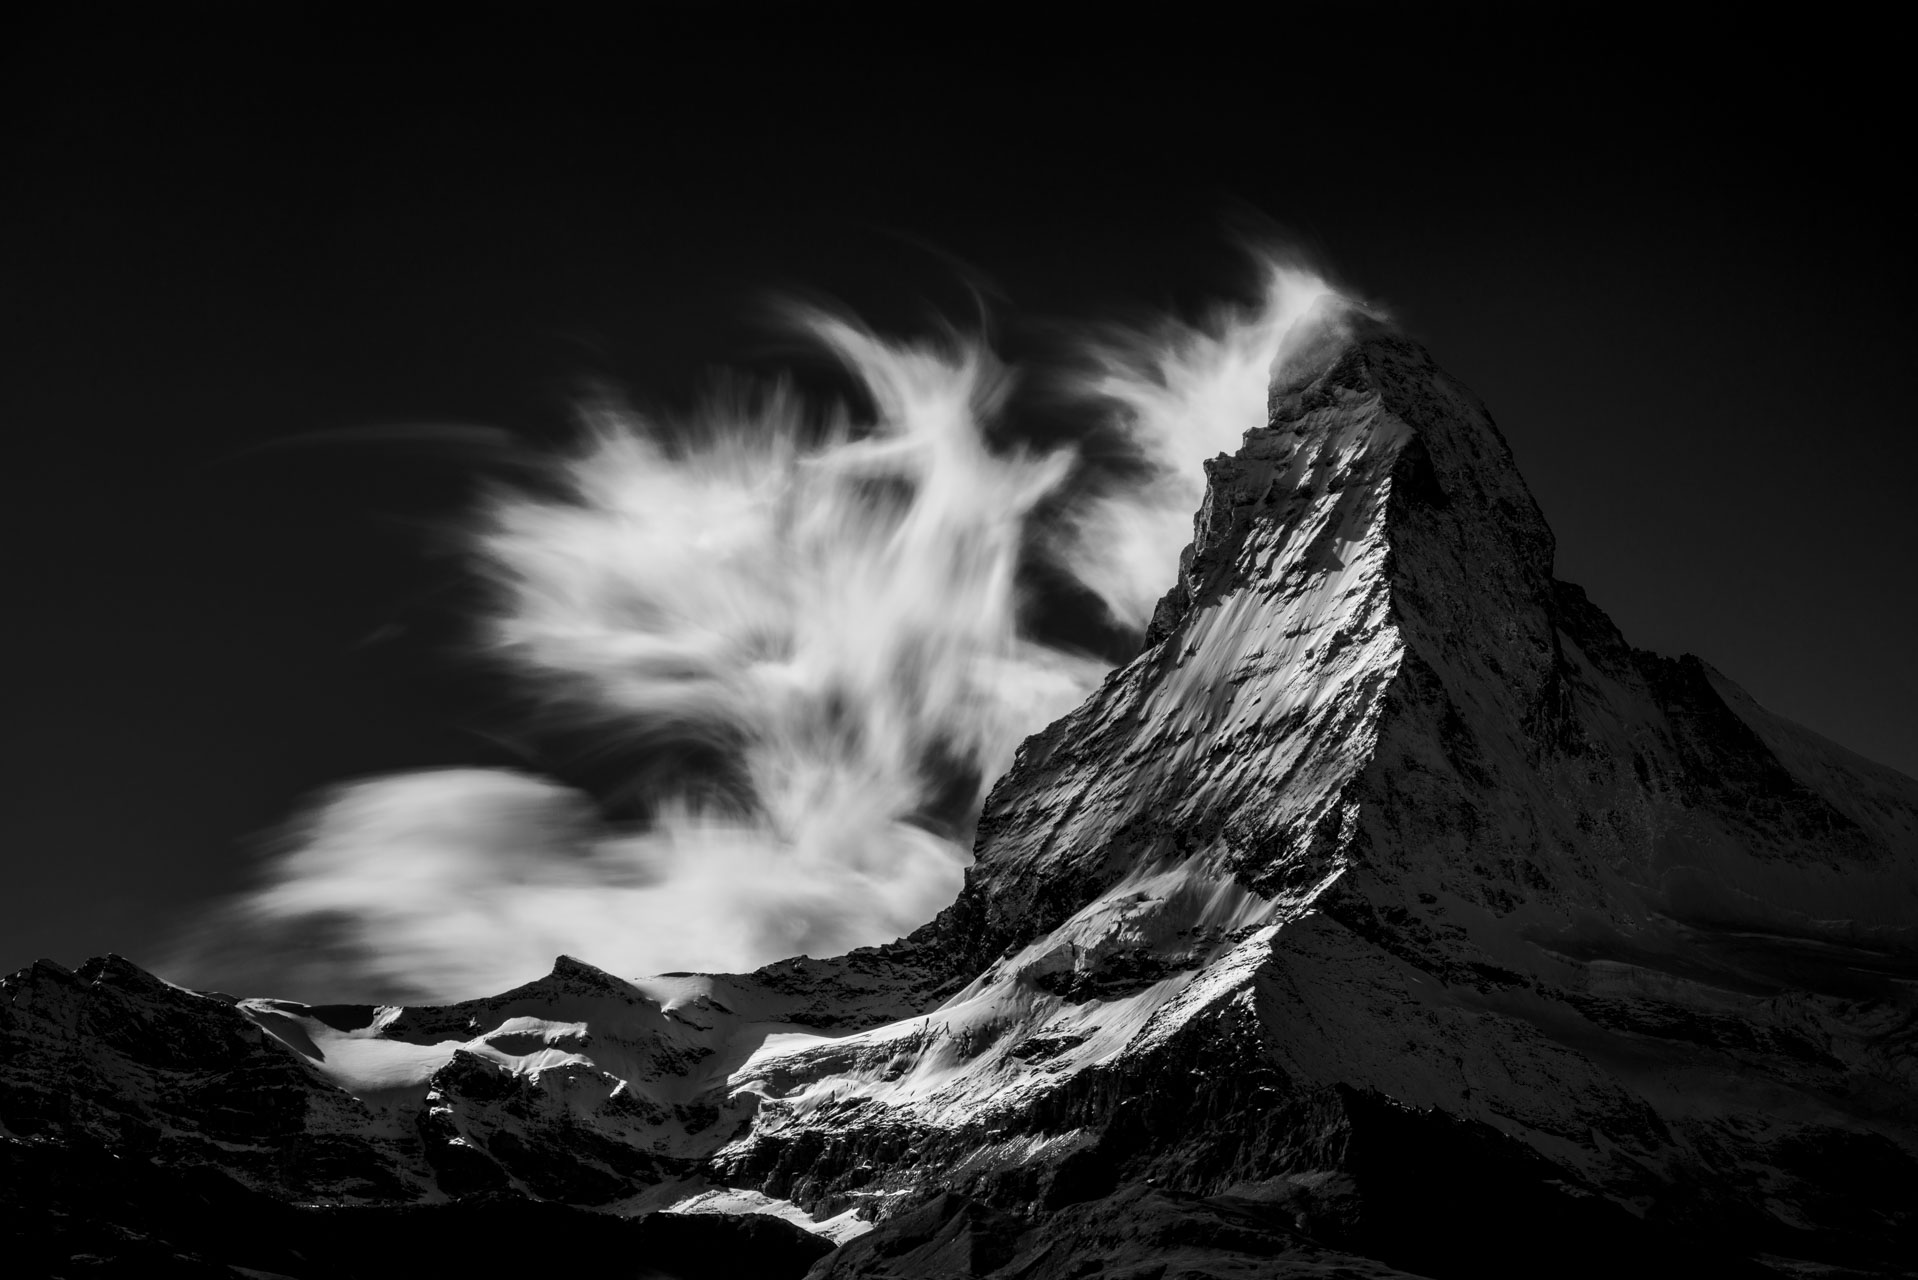 The Matterhorn - moutains images from the cervin in swiss alps seen from Findelalp